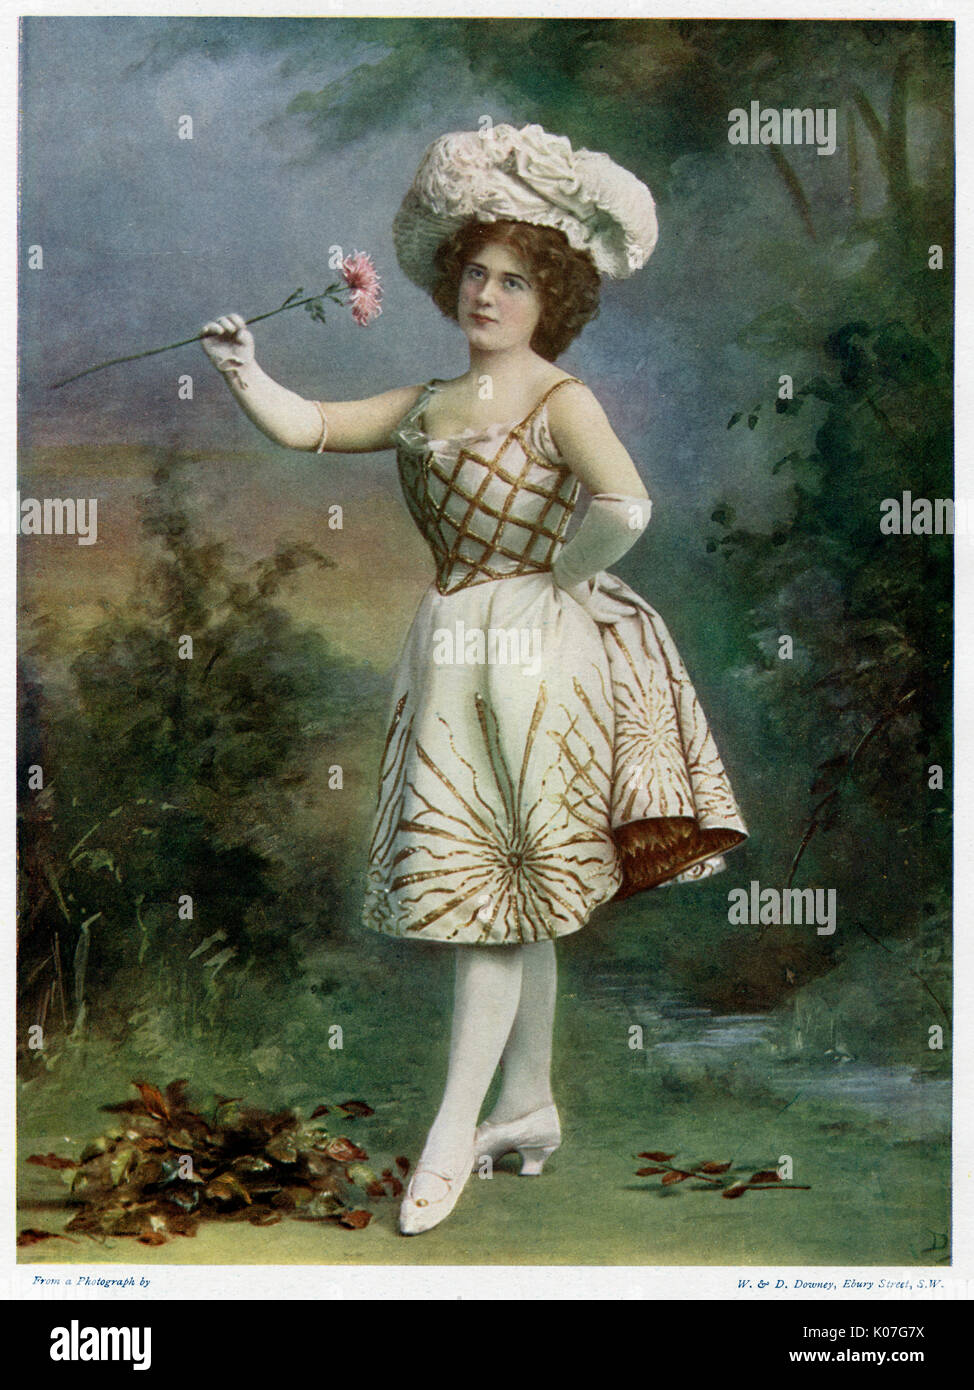 Ella Snyder, actress in 'The Belle of New York'      Date: 1899 Stock Photo